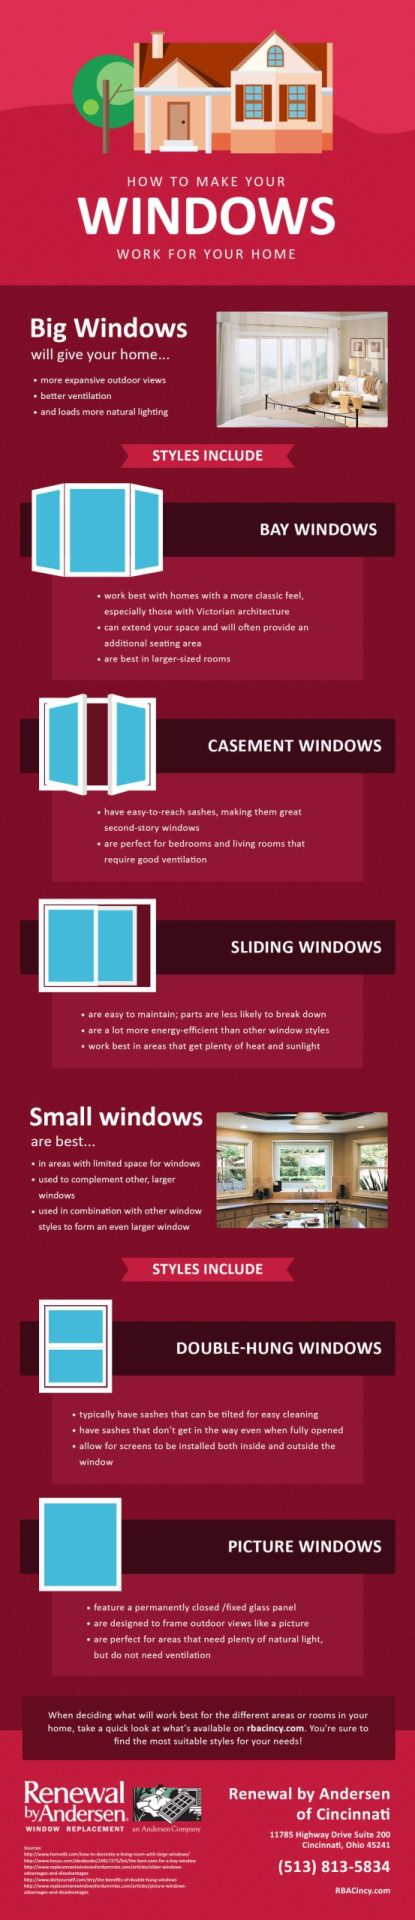 How to Make Big and Small Windows Work for Your Home